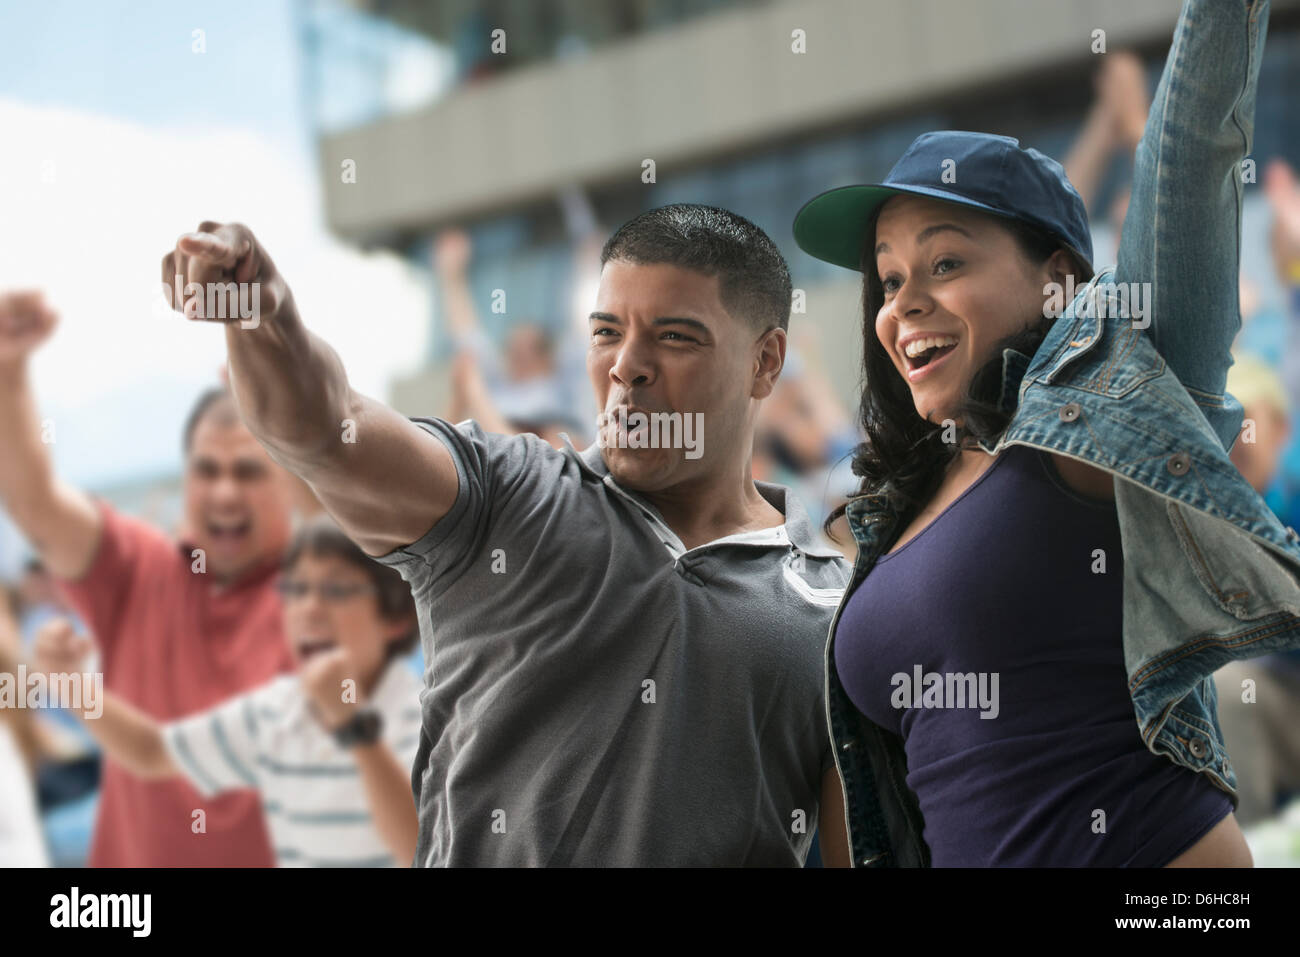 Couple cheering at sports game Stock Photo